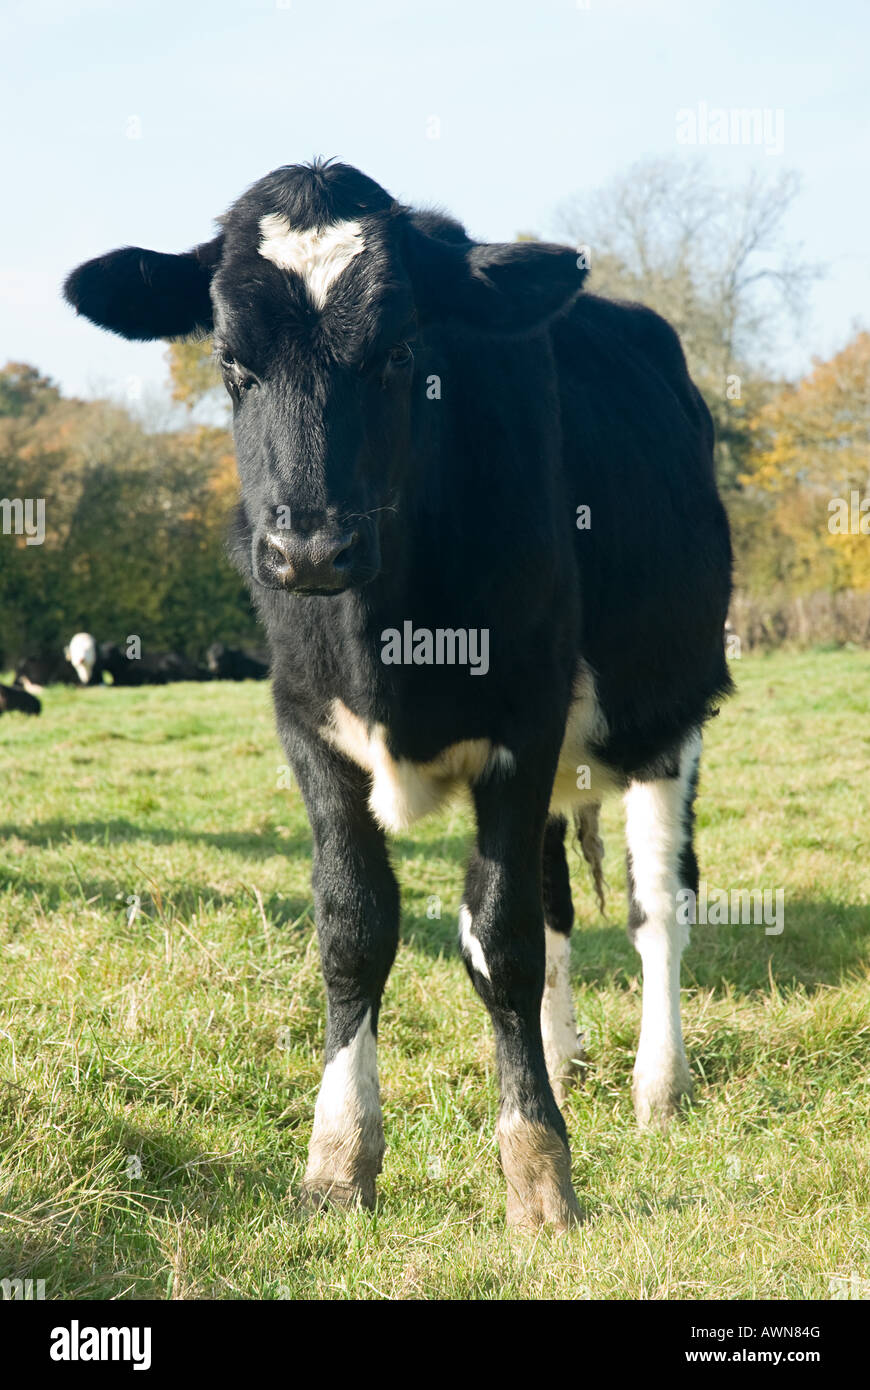 Cow in a field Stock Photo